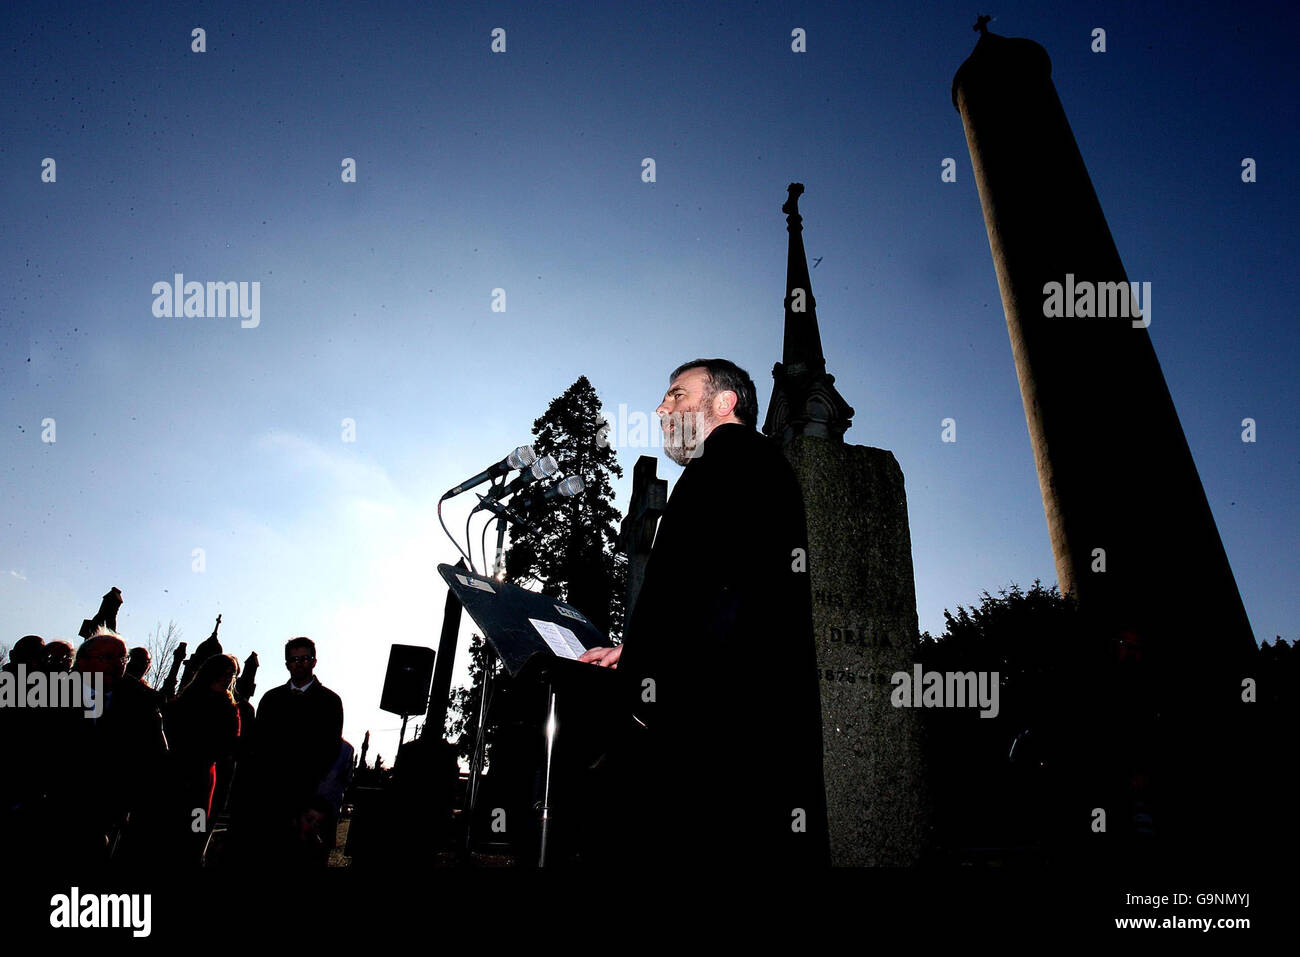 SIPTU president Jack O' Connor addresses the crowd at the graveside of Jim Larkin in Glasnevin Cemetery, Dublin, at an event marking the centenary of a dockers strike led by Larkin. PRESS ASSOCIATION Photo. Stock Photo